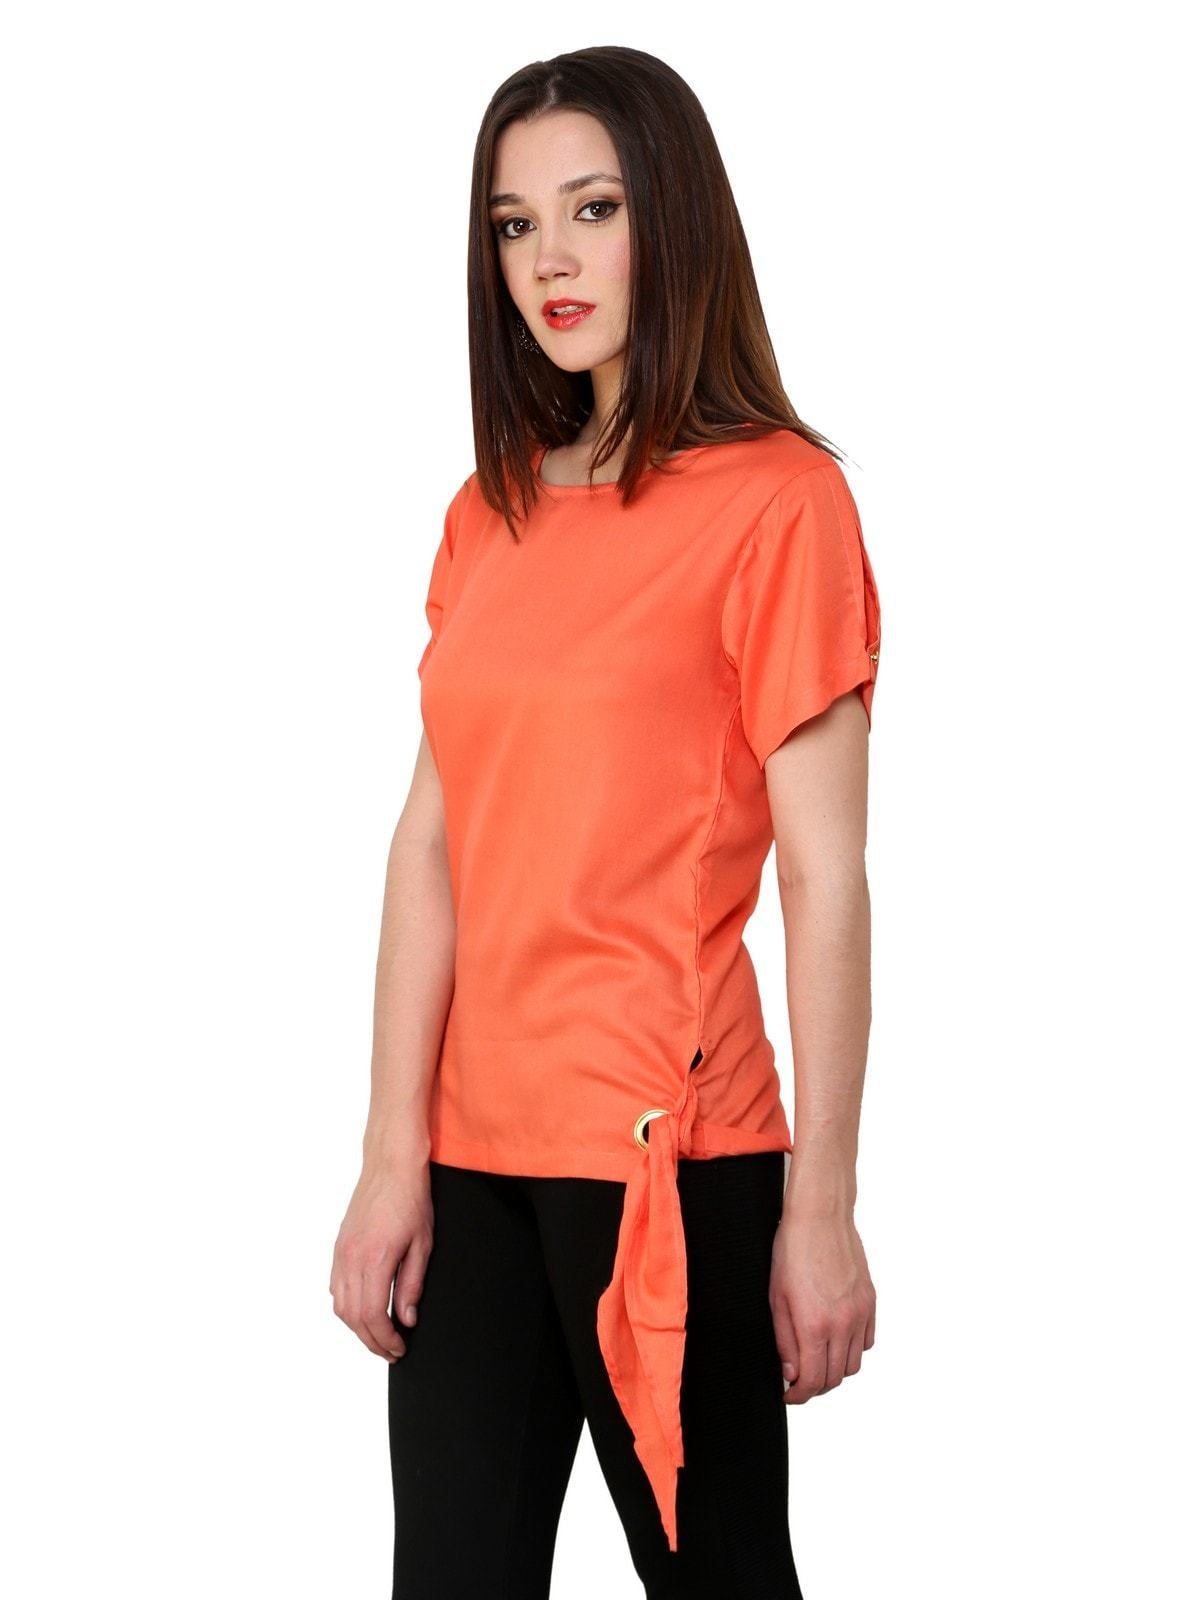 Women's Knotted Top - Pannkh